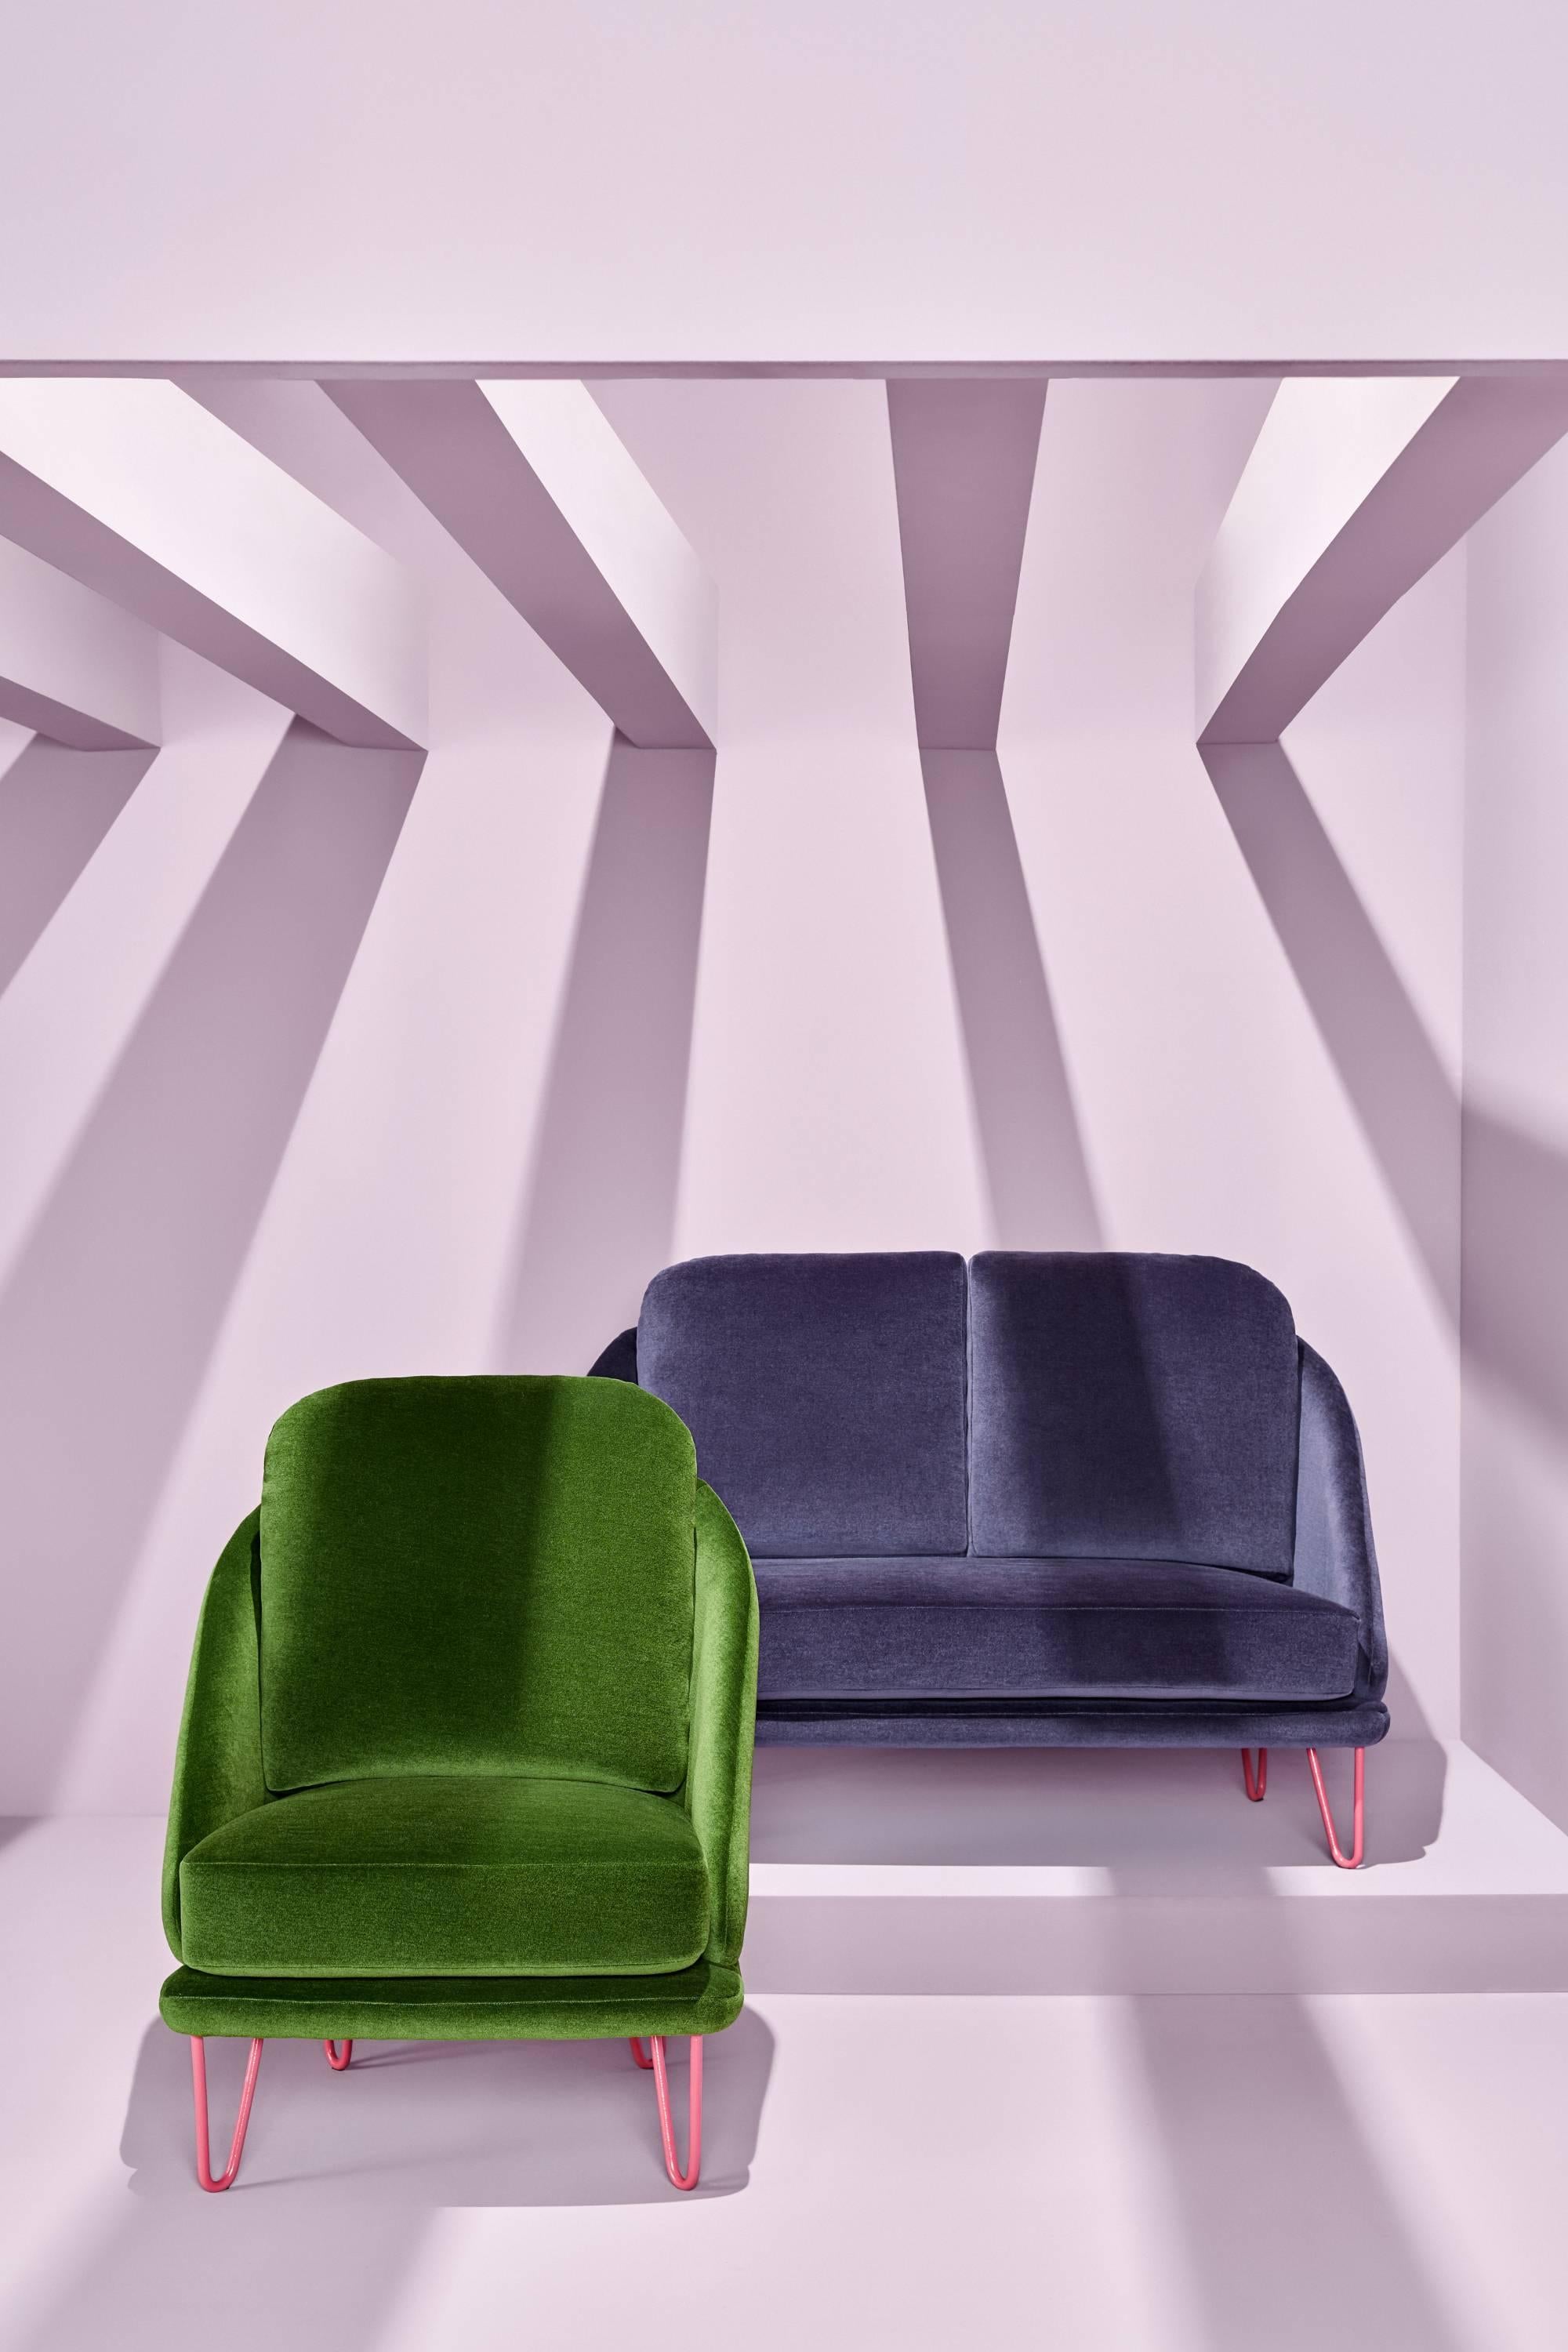 Agora purple sofa by Pepe Albargues.
Dimensions: H 94 x D 98 x W x 138 cm
Materials: Iron and beech wood structure. Seat cushions stuffed with polyurethane covered with polyester fibre. Backrest cushions stuffed with 50% goose feathers and 50%